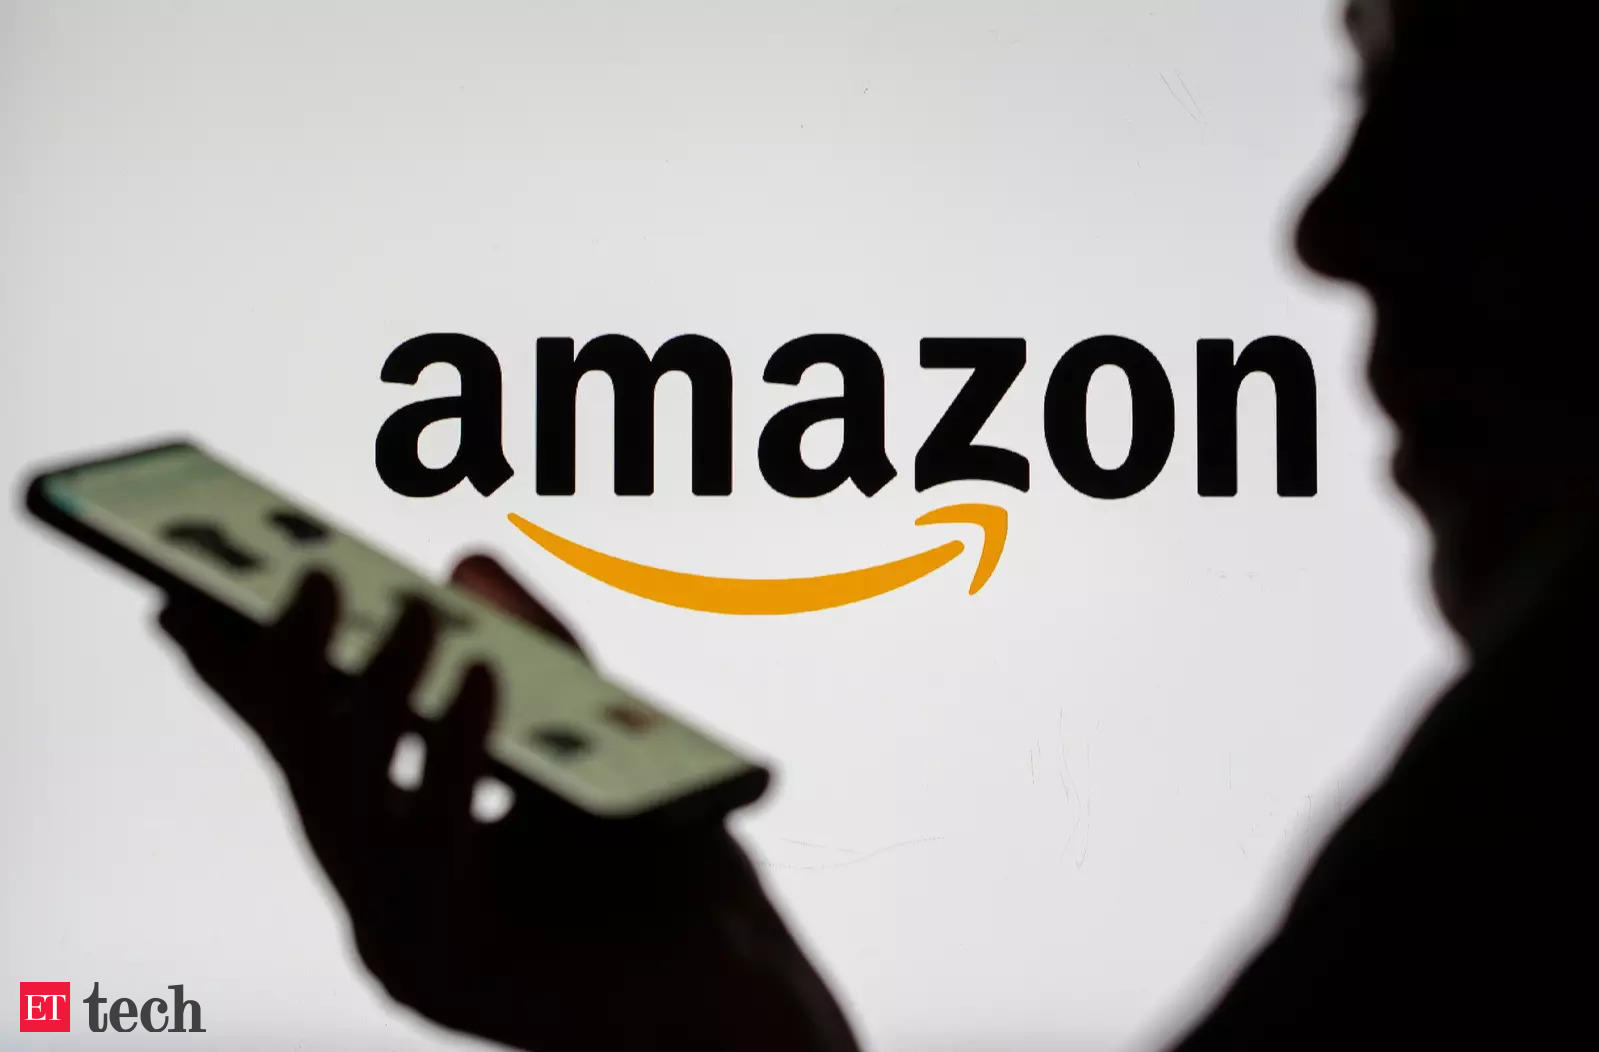 amazon: Amazon seeks relief from ED investigation in Delhi High Court - The  Economic Times